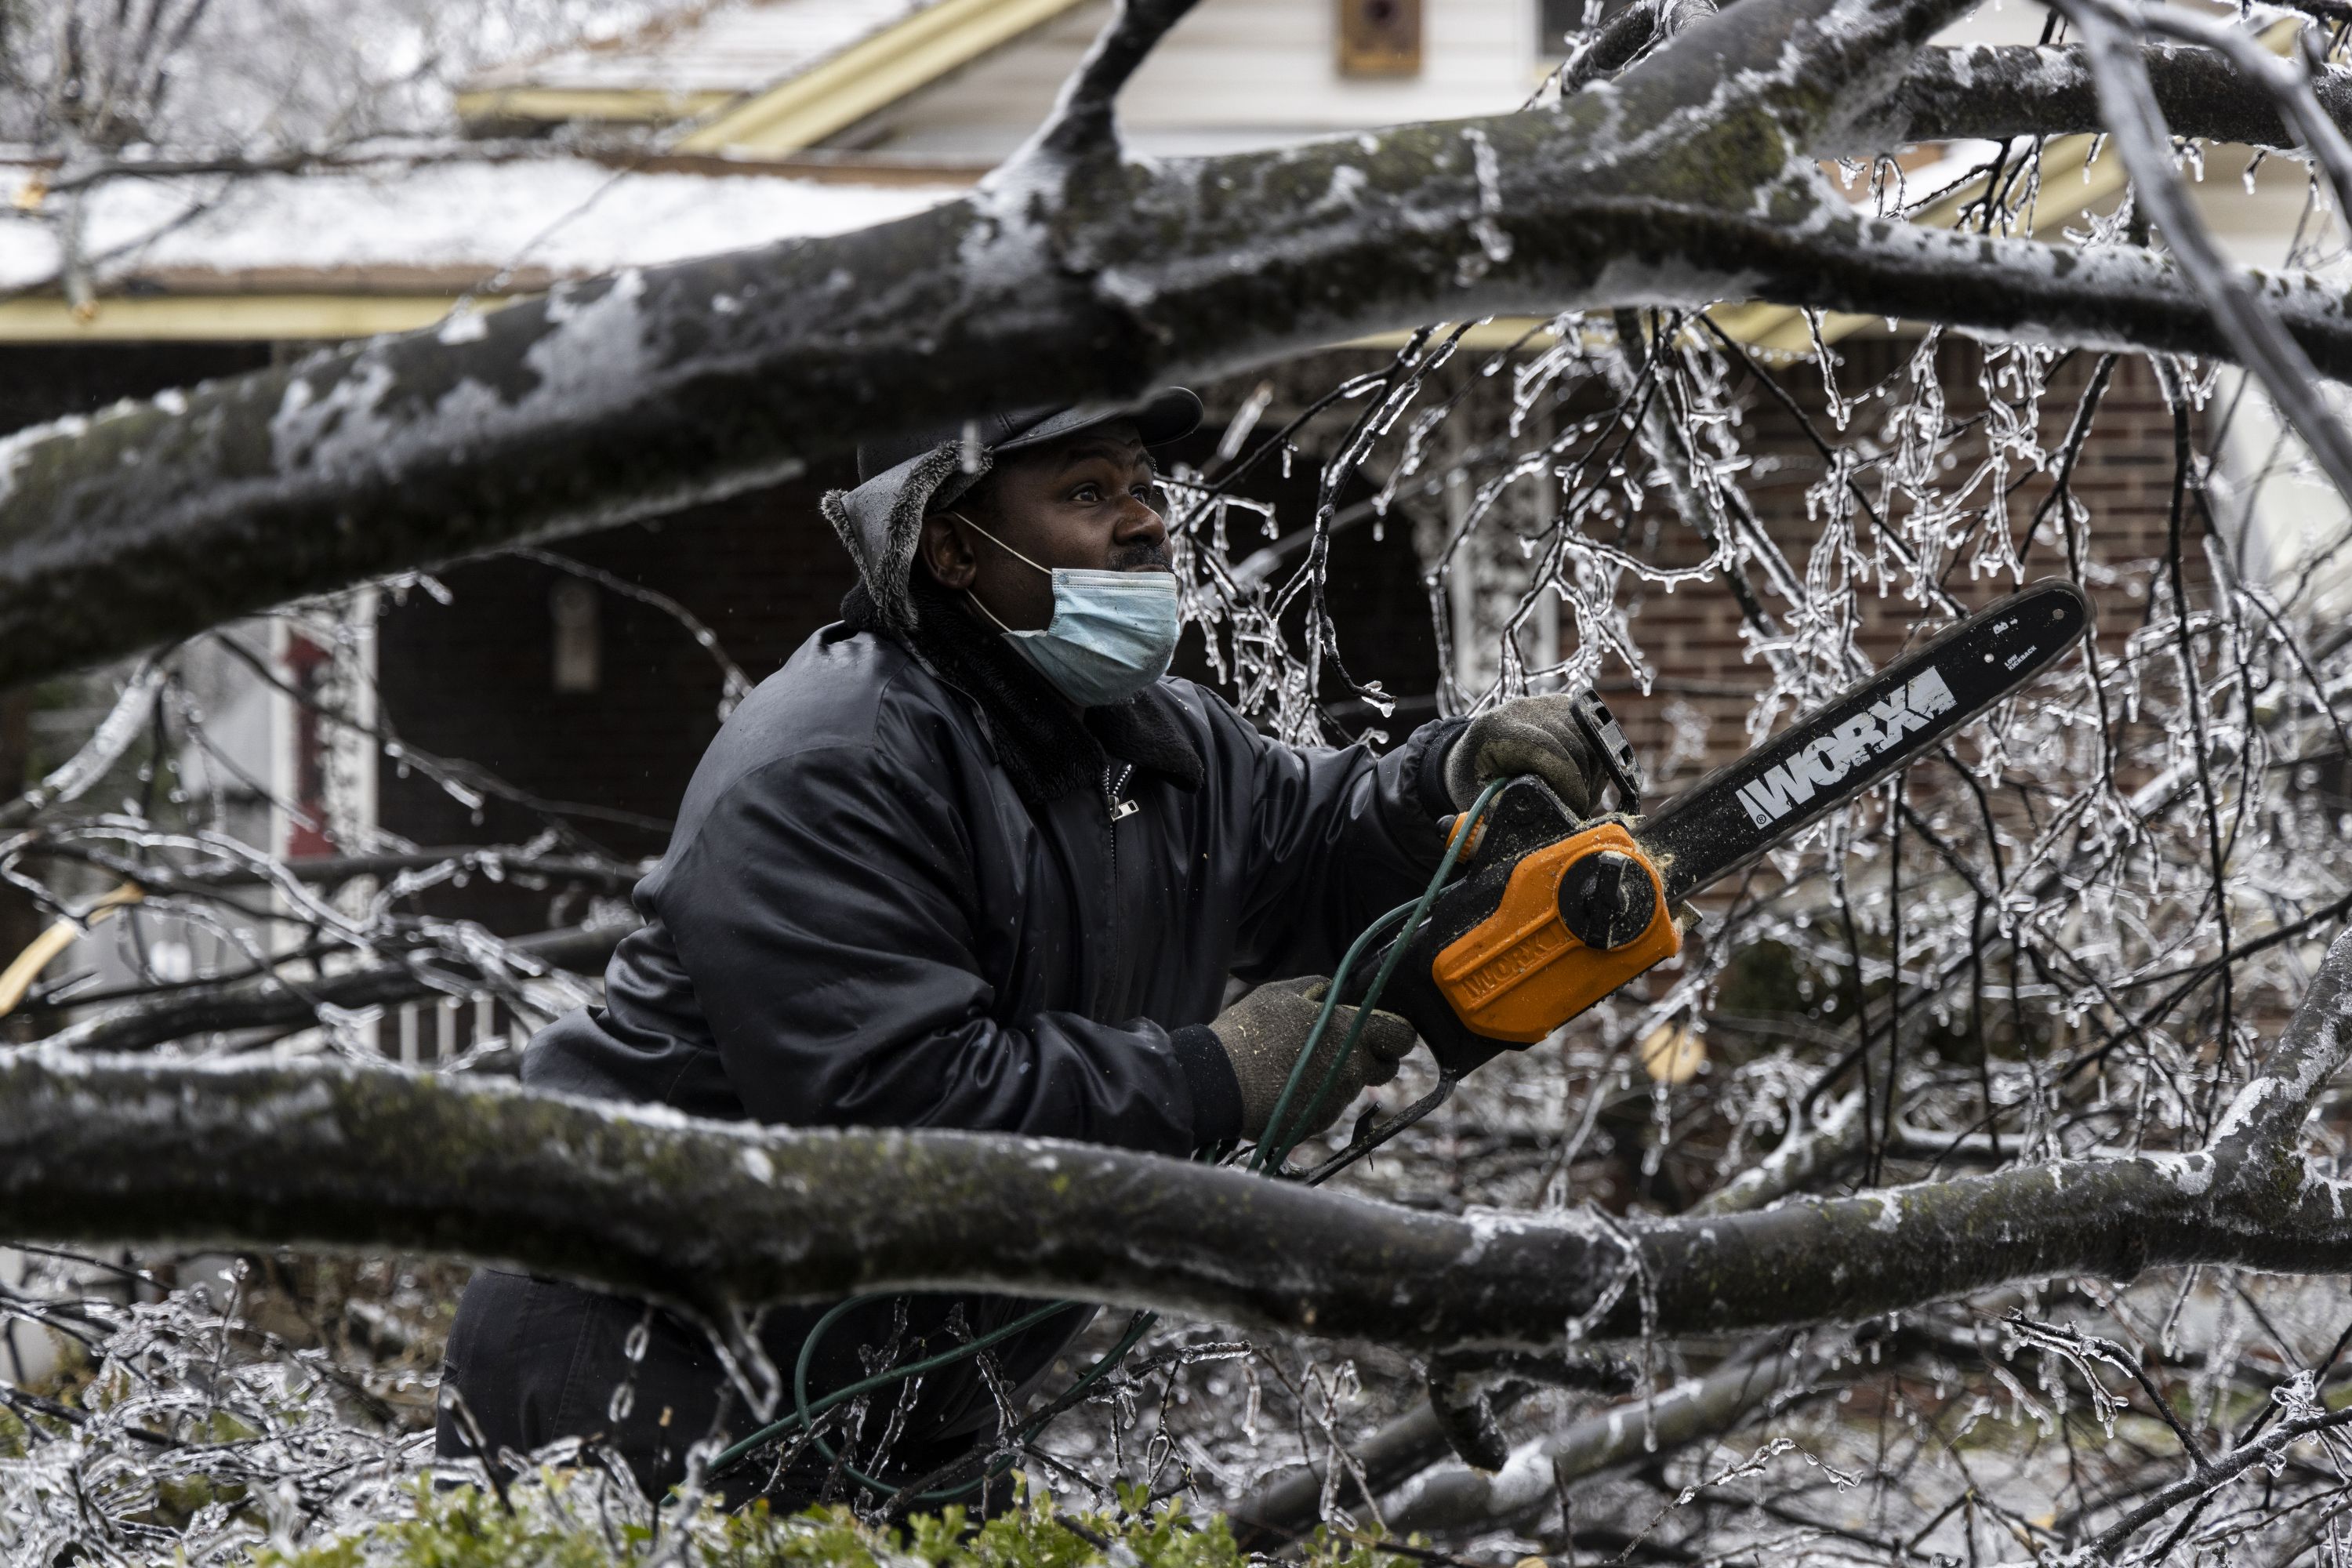 A person clearing a downed tree in Memphis, Tennessee, on Feb. 3.